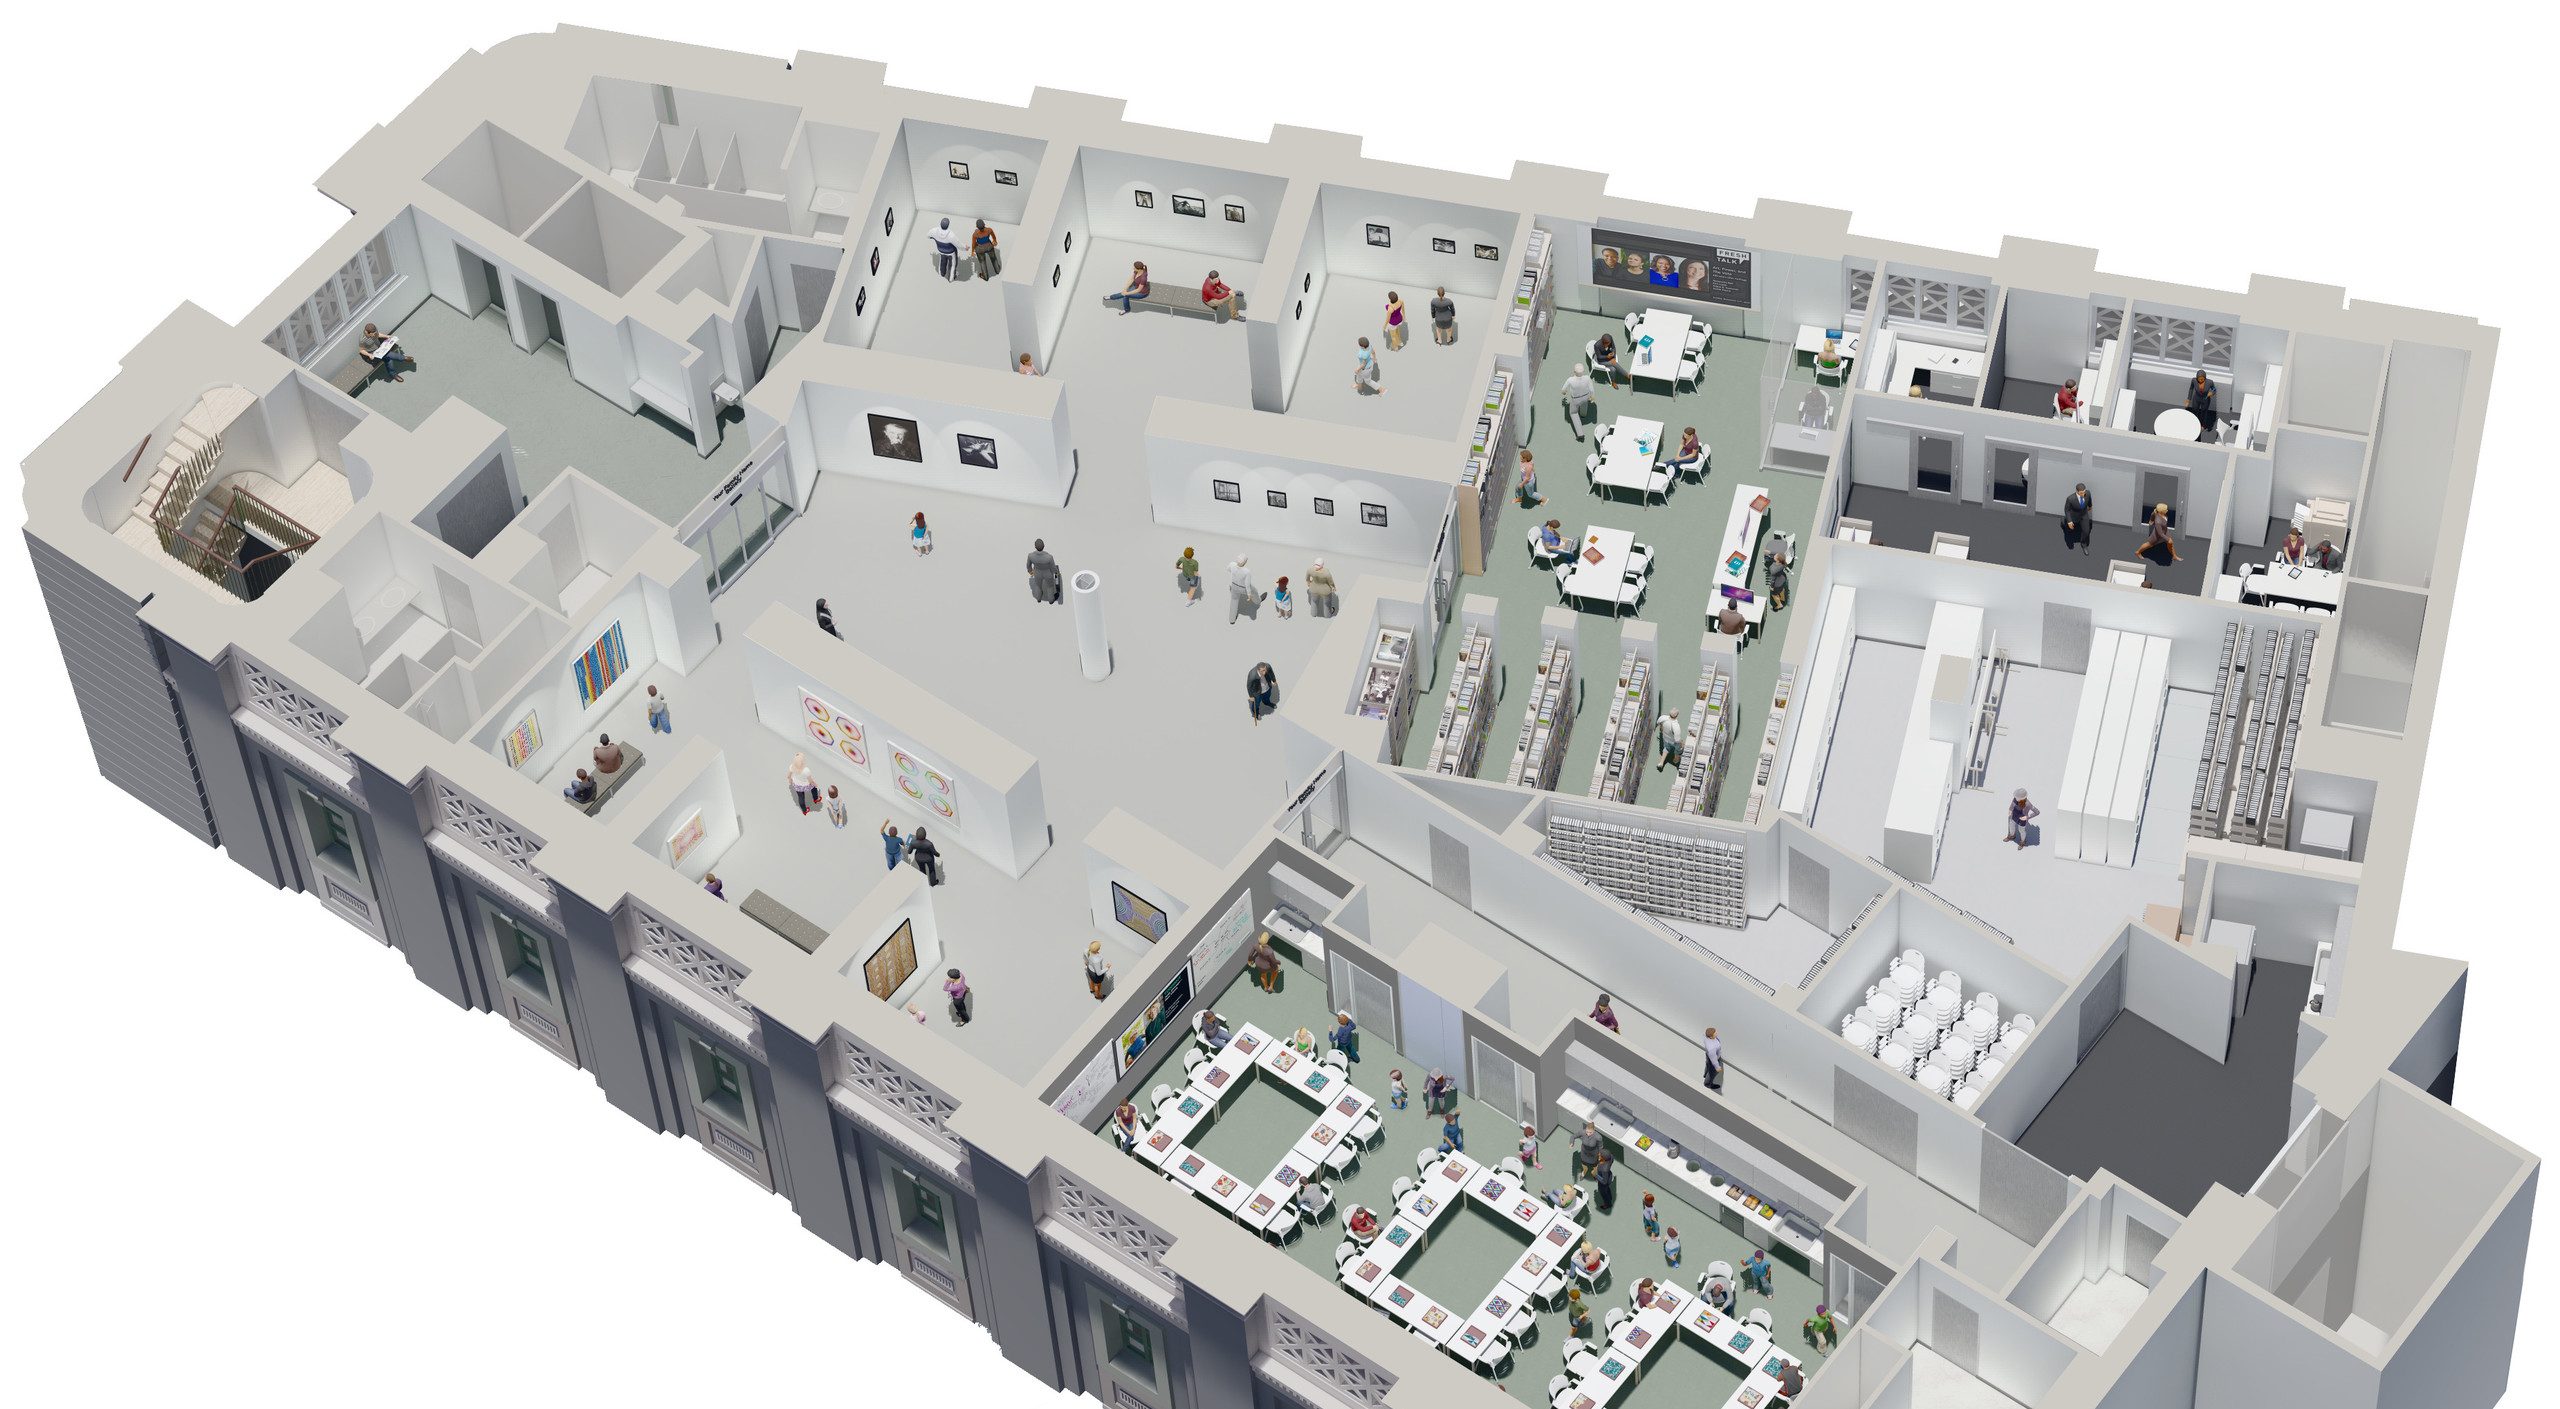 Birds-eye rendering of what the fourth floor will look like, includes a view of the new Library learning commons, the Education Center, and new gallery space..